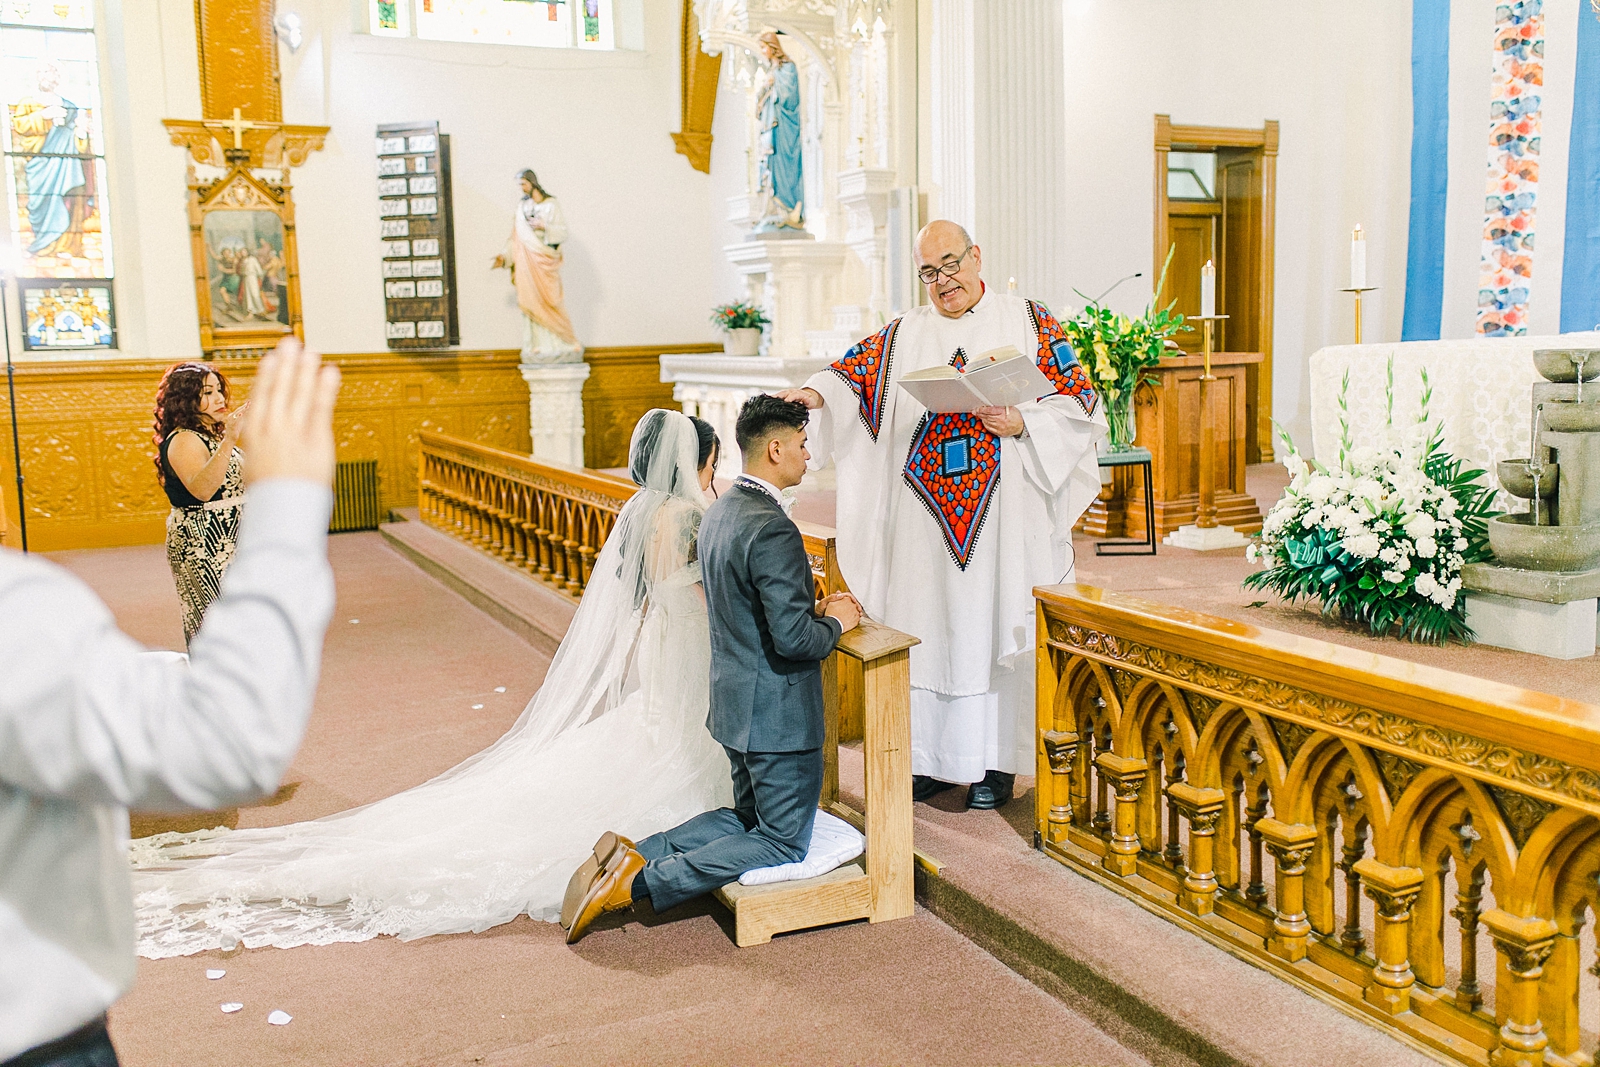 Cache Valley Logan Traditional Catholic Wedding Ceremony in a cathedral, Utah wedding photography